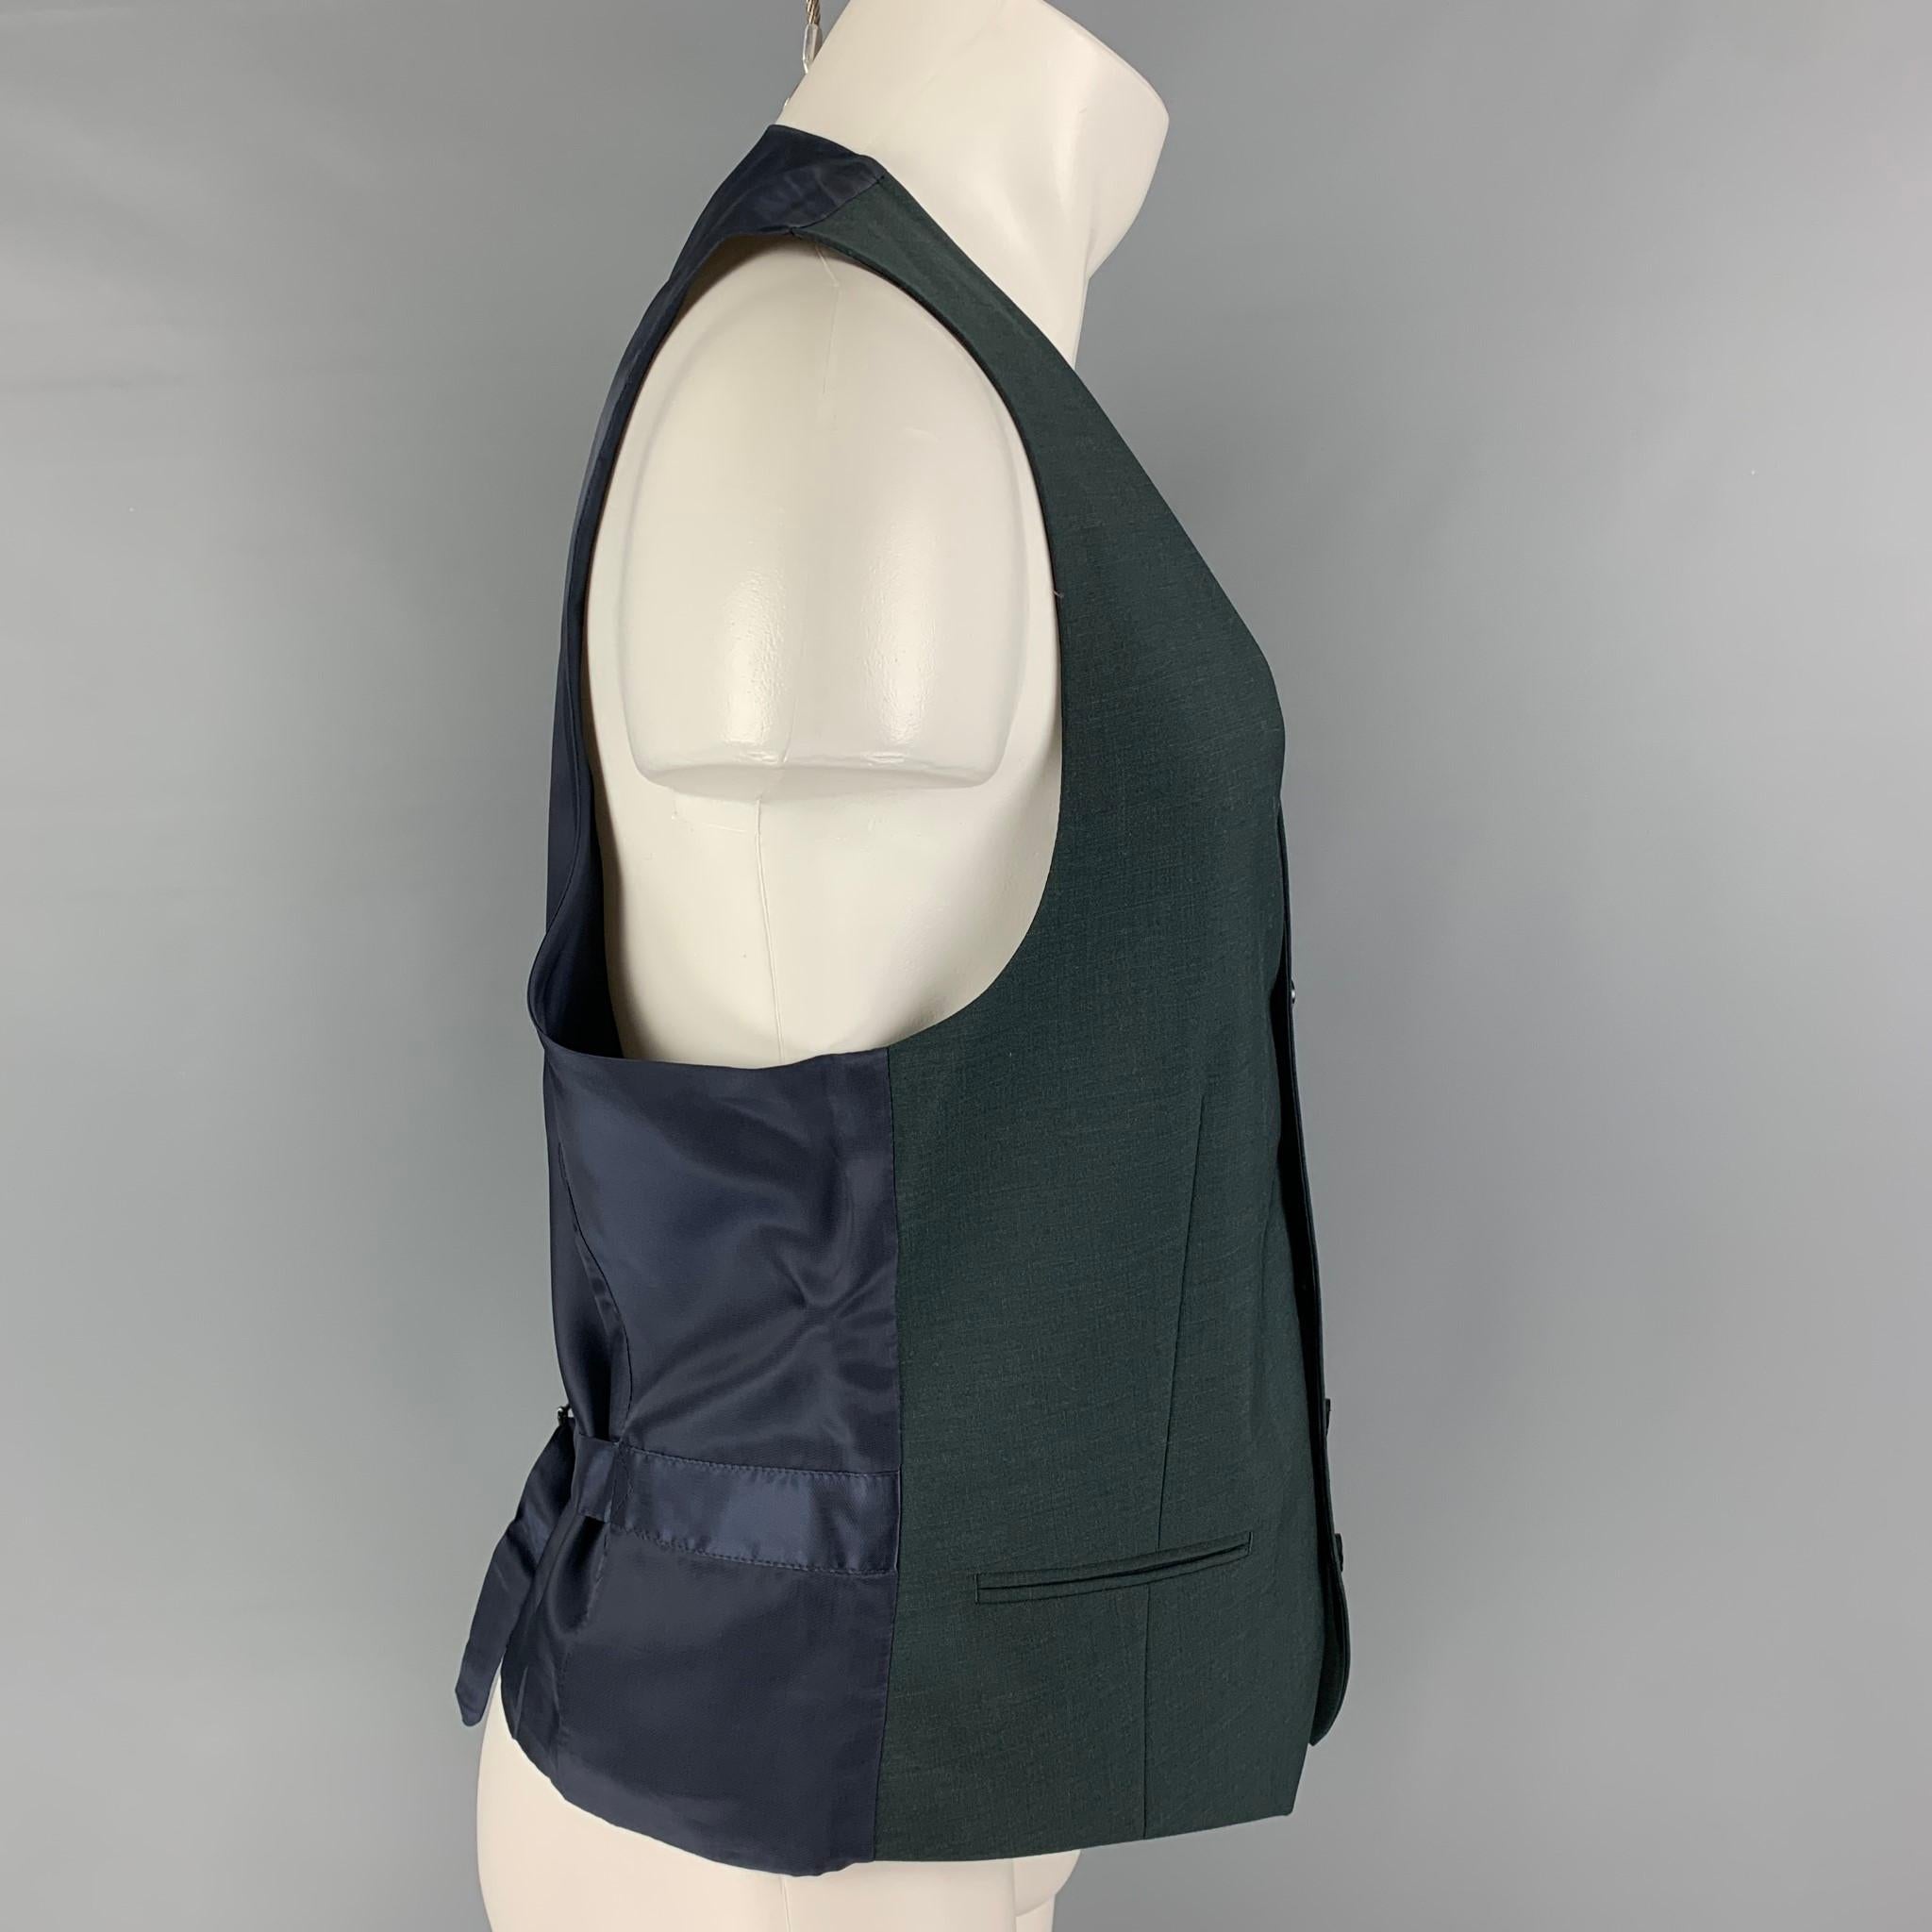 SUIT SUPPLY vest comes in a forest green wool featuring slit pockets, adjustable back strap, and a buttoned closure. 

Excellent Pre-Owned Condition.
Marked: 50

Measurements:

Shoulder: 14 in.
Chest: 40 in.
Length: 23 in.